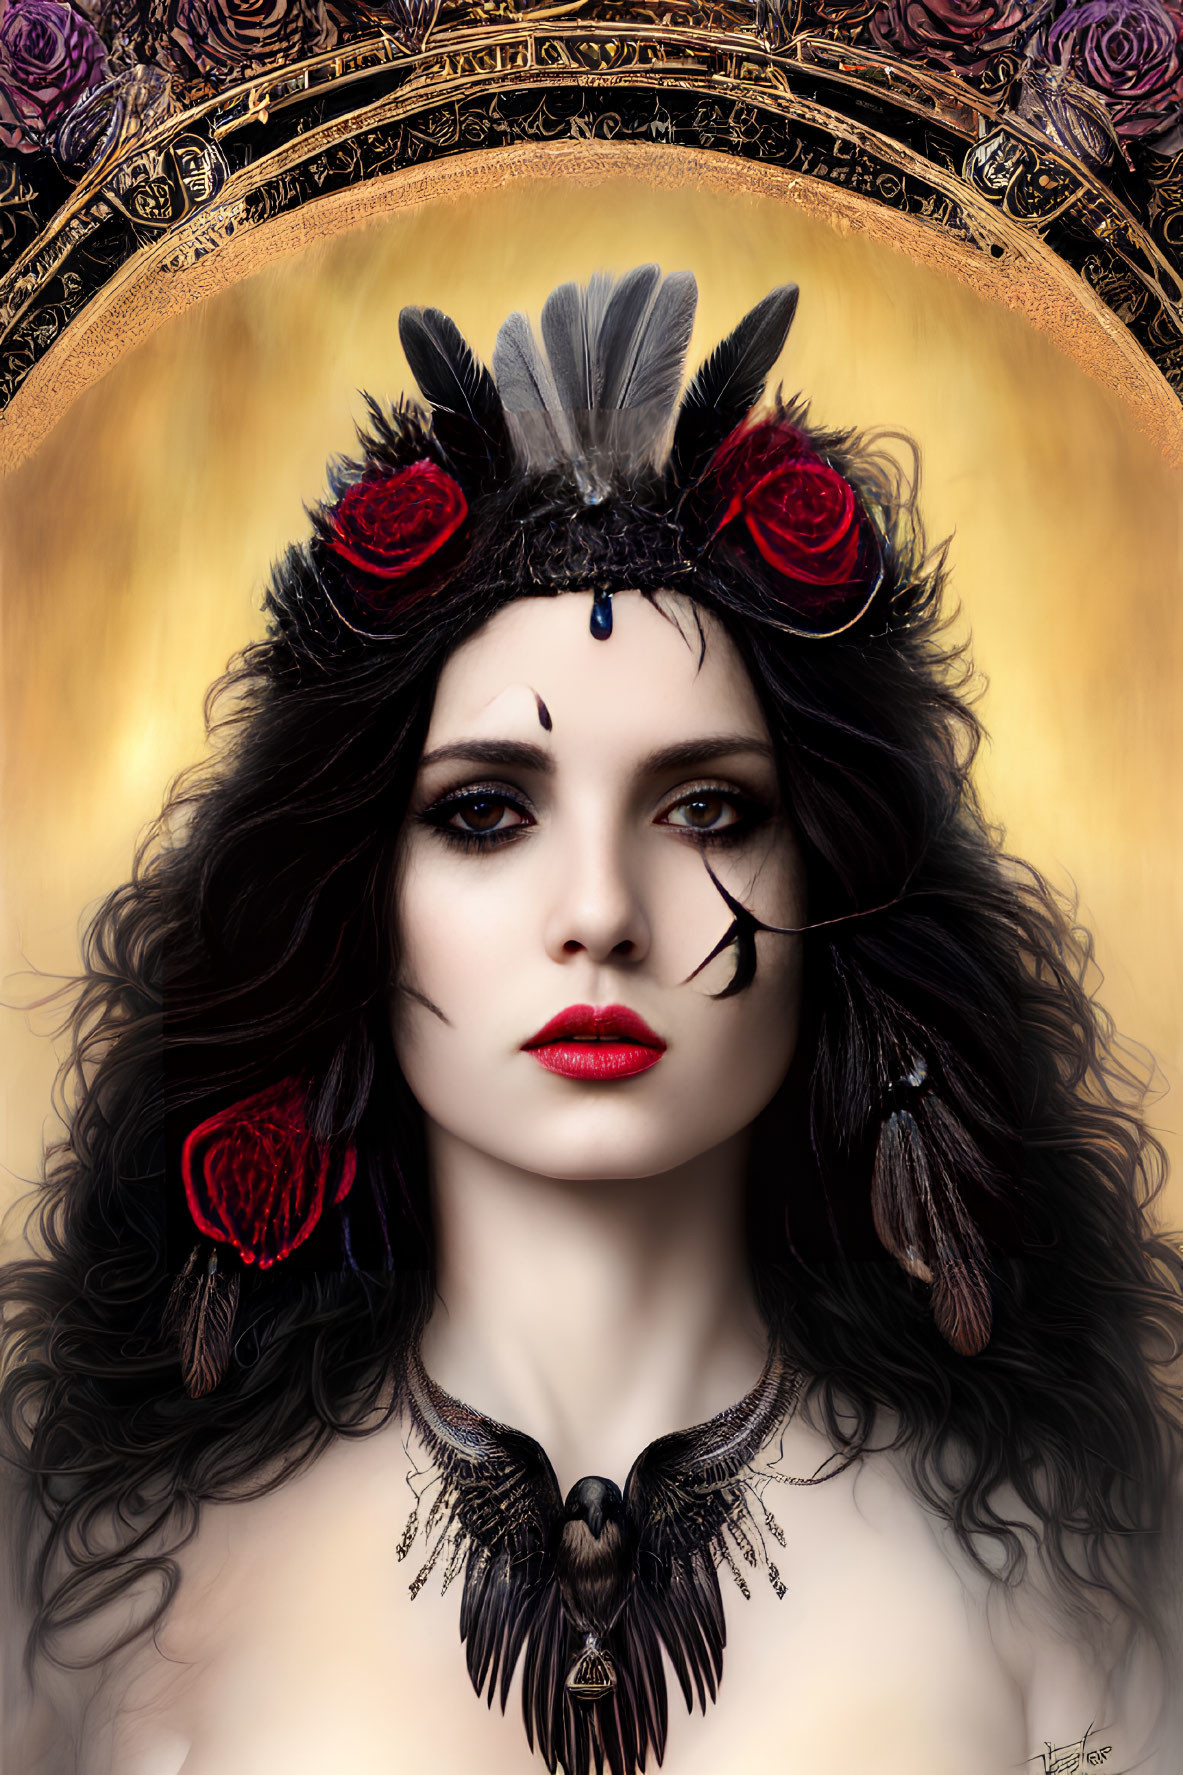 Pale-skinned woman with dark hair and striking makeup in headdress with feathers, roses, and bird